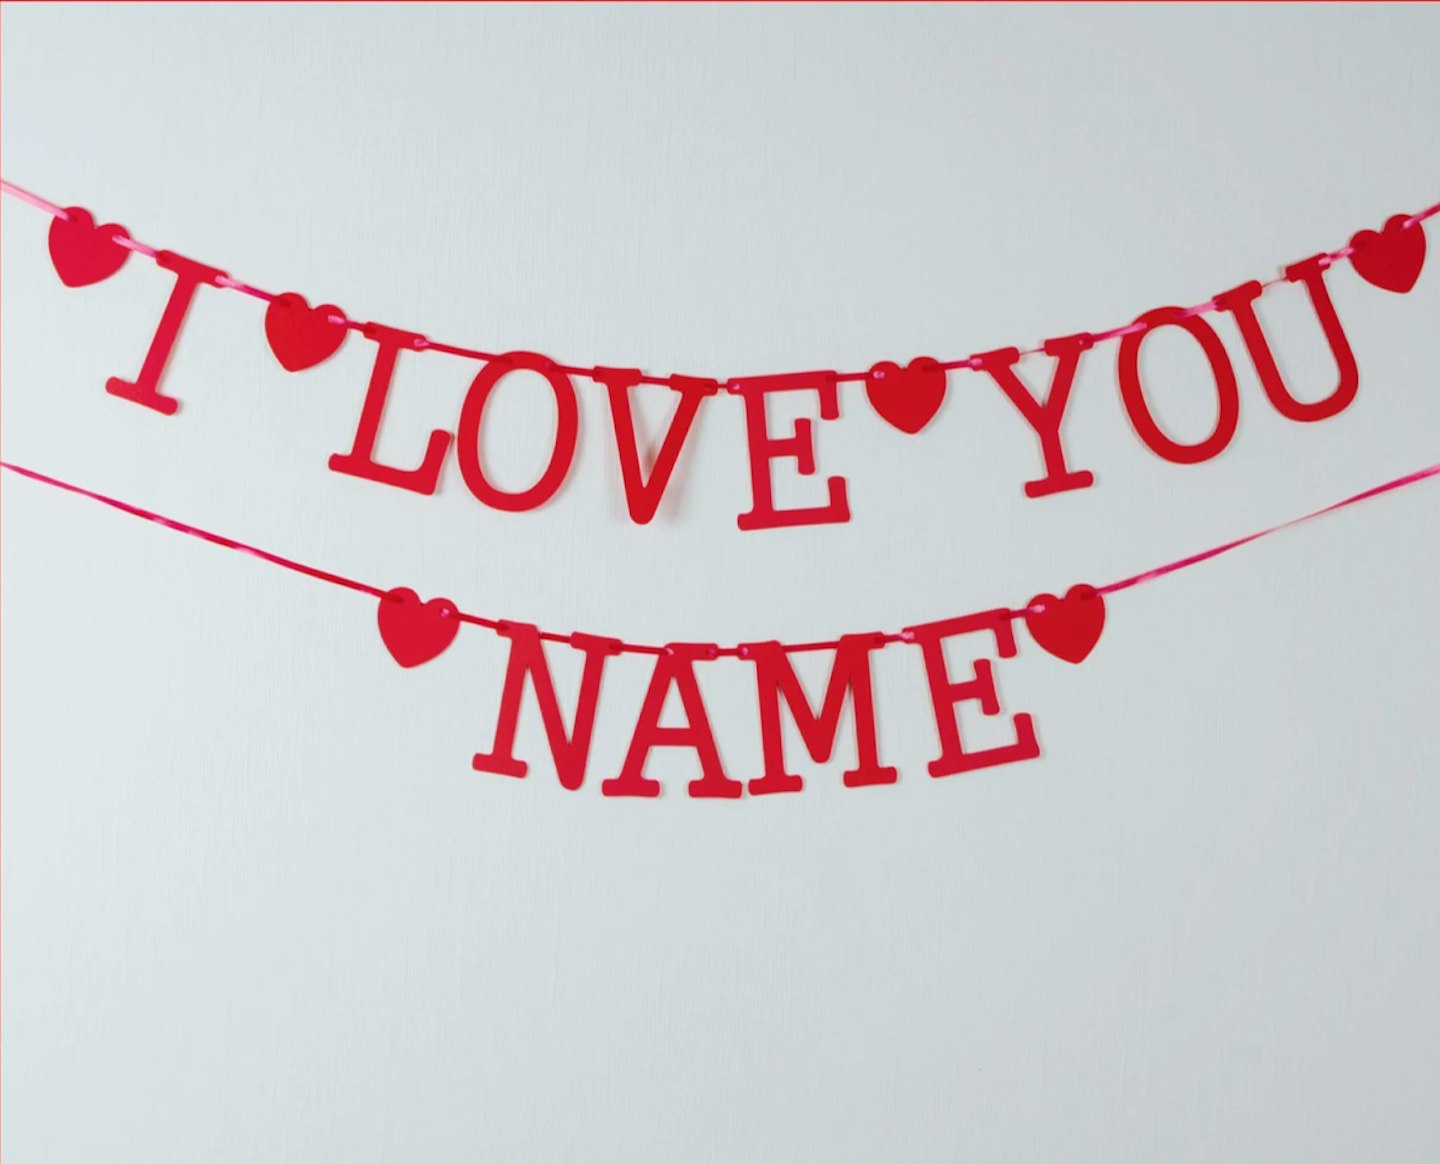 I LOVE YOU Banner personalised name red valentines bunting decorations